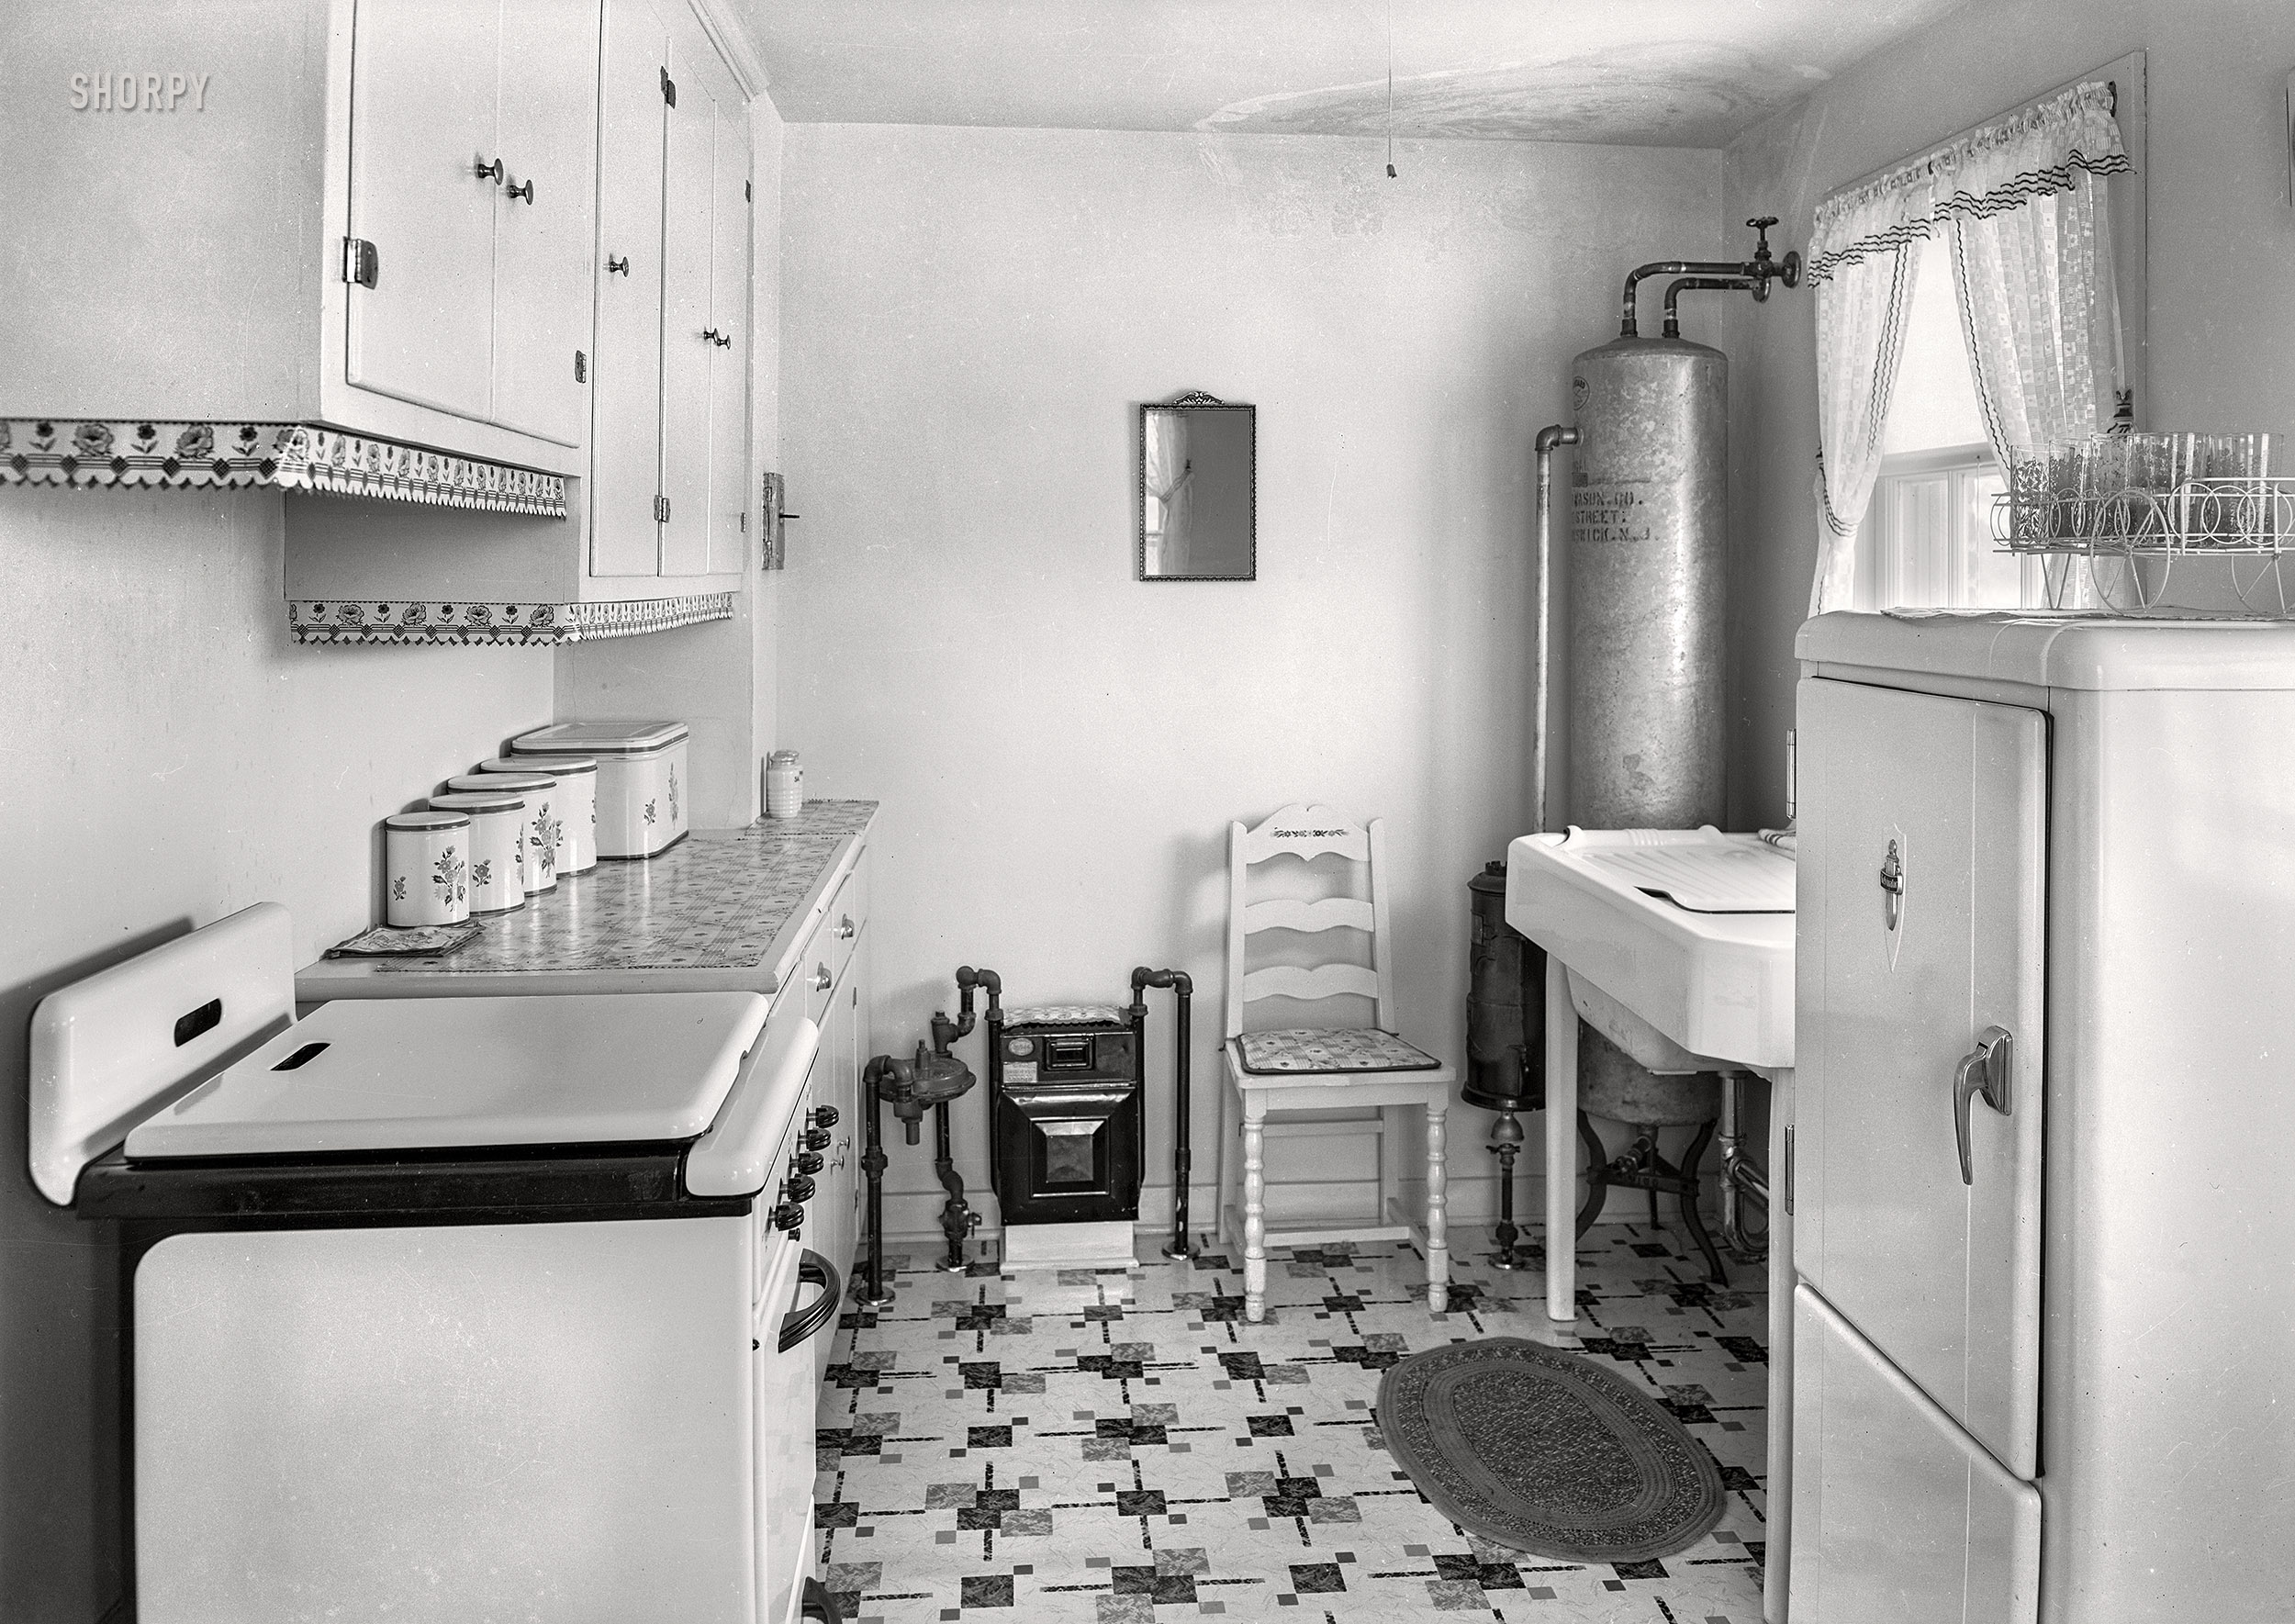 September 4, 1940. Middlesex County, New Jersey. "New Brunswick Housing Authority. Reed Court, Apartment J, kitchen." 5x7 inch acetate negative by Gottscho-Schleisner. View full size.